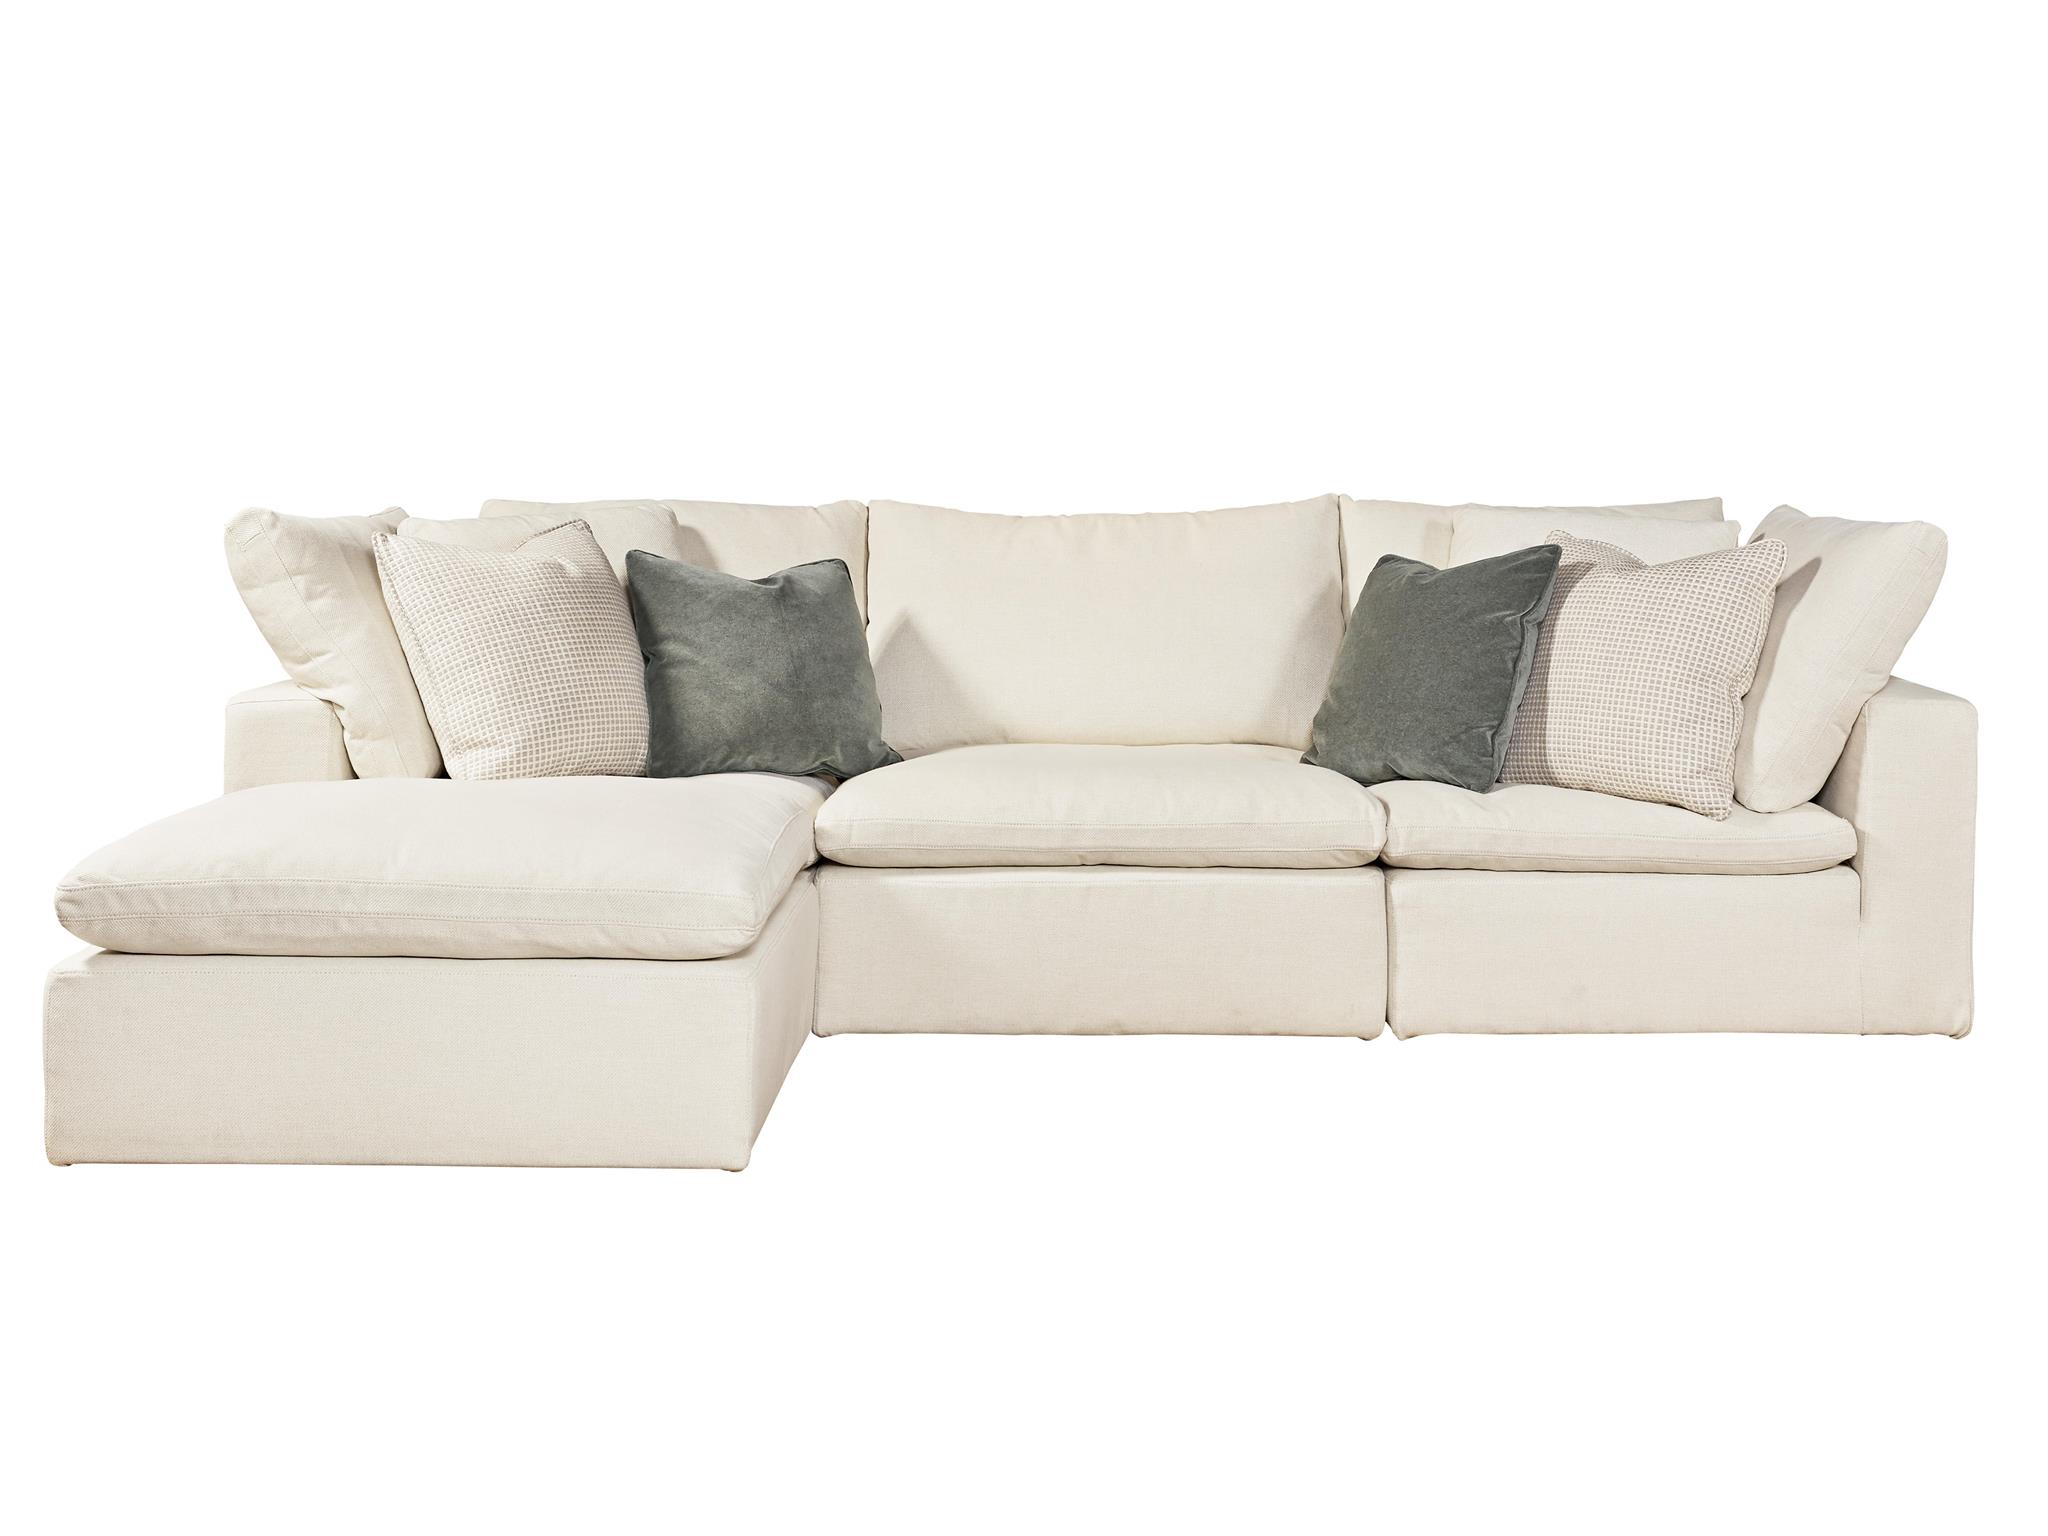 Palmer Sectional-4 Piece